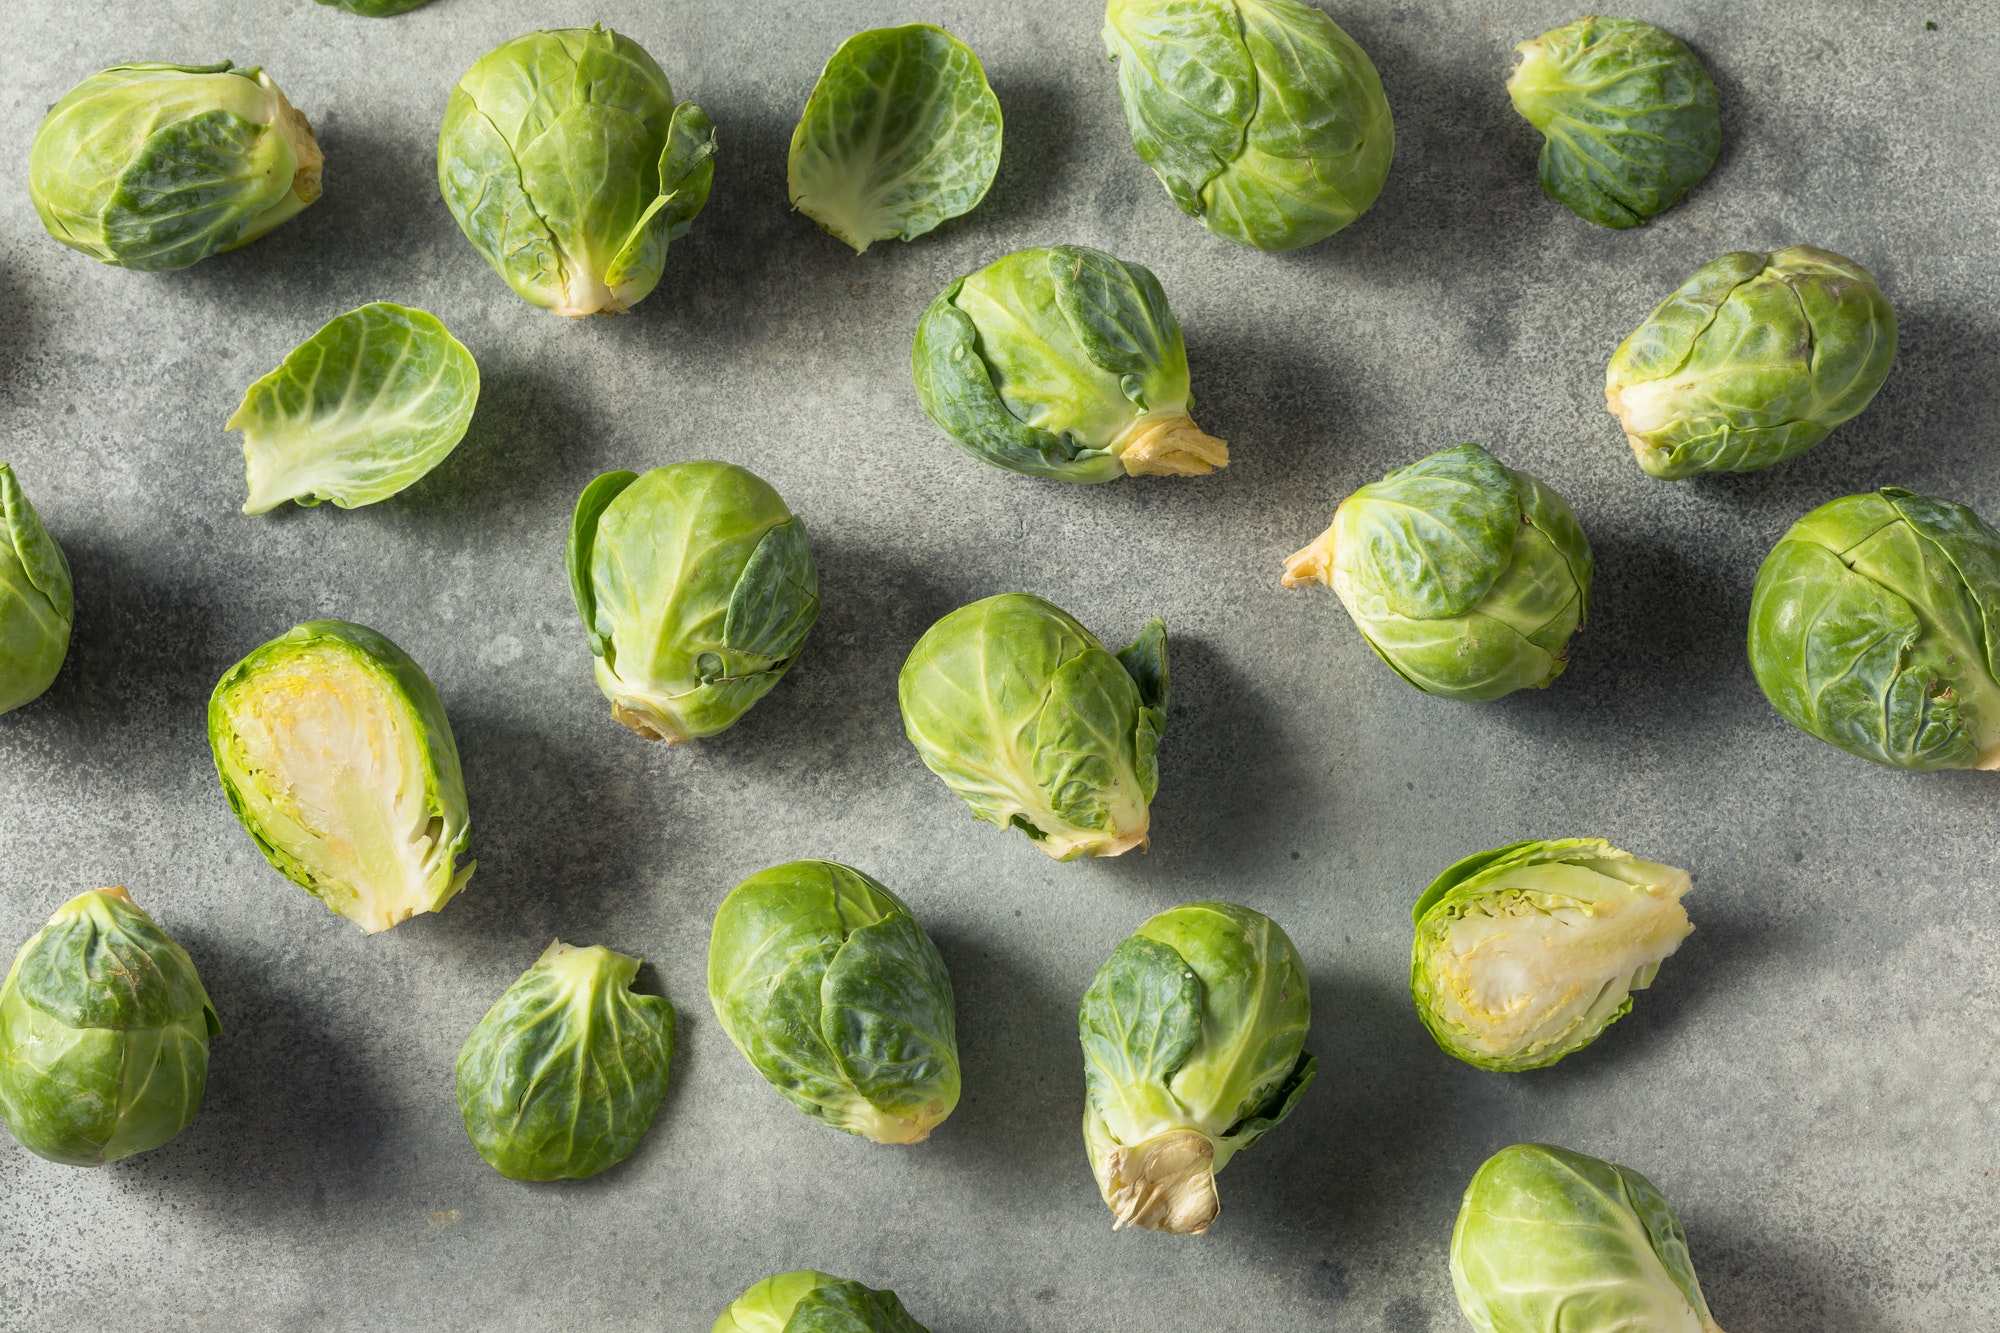 Raw Green Organic Brussel Sprouts